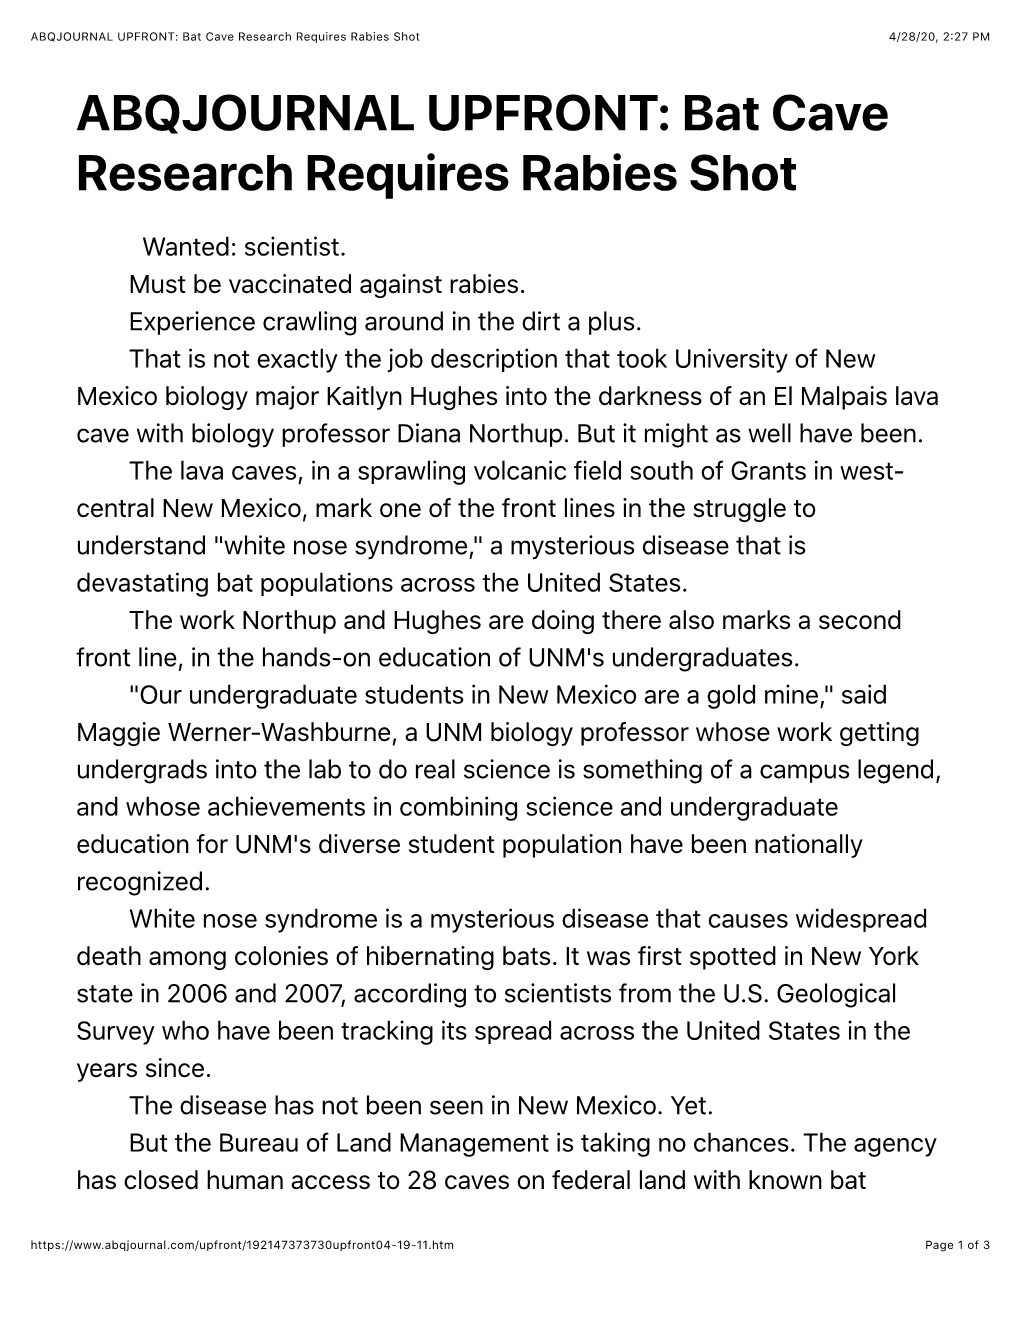 ABQJOURNAL UPFRONT: Bat Cave Research Requires Rabies Shot 4/28/20, 2:27 PM ABQJOURNAL UPFRONT: Bat Cave Research Requires Rabies Shot